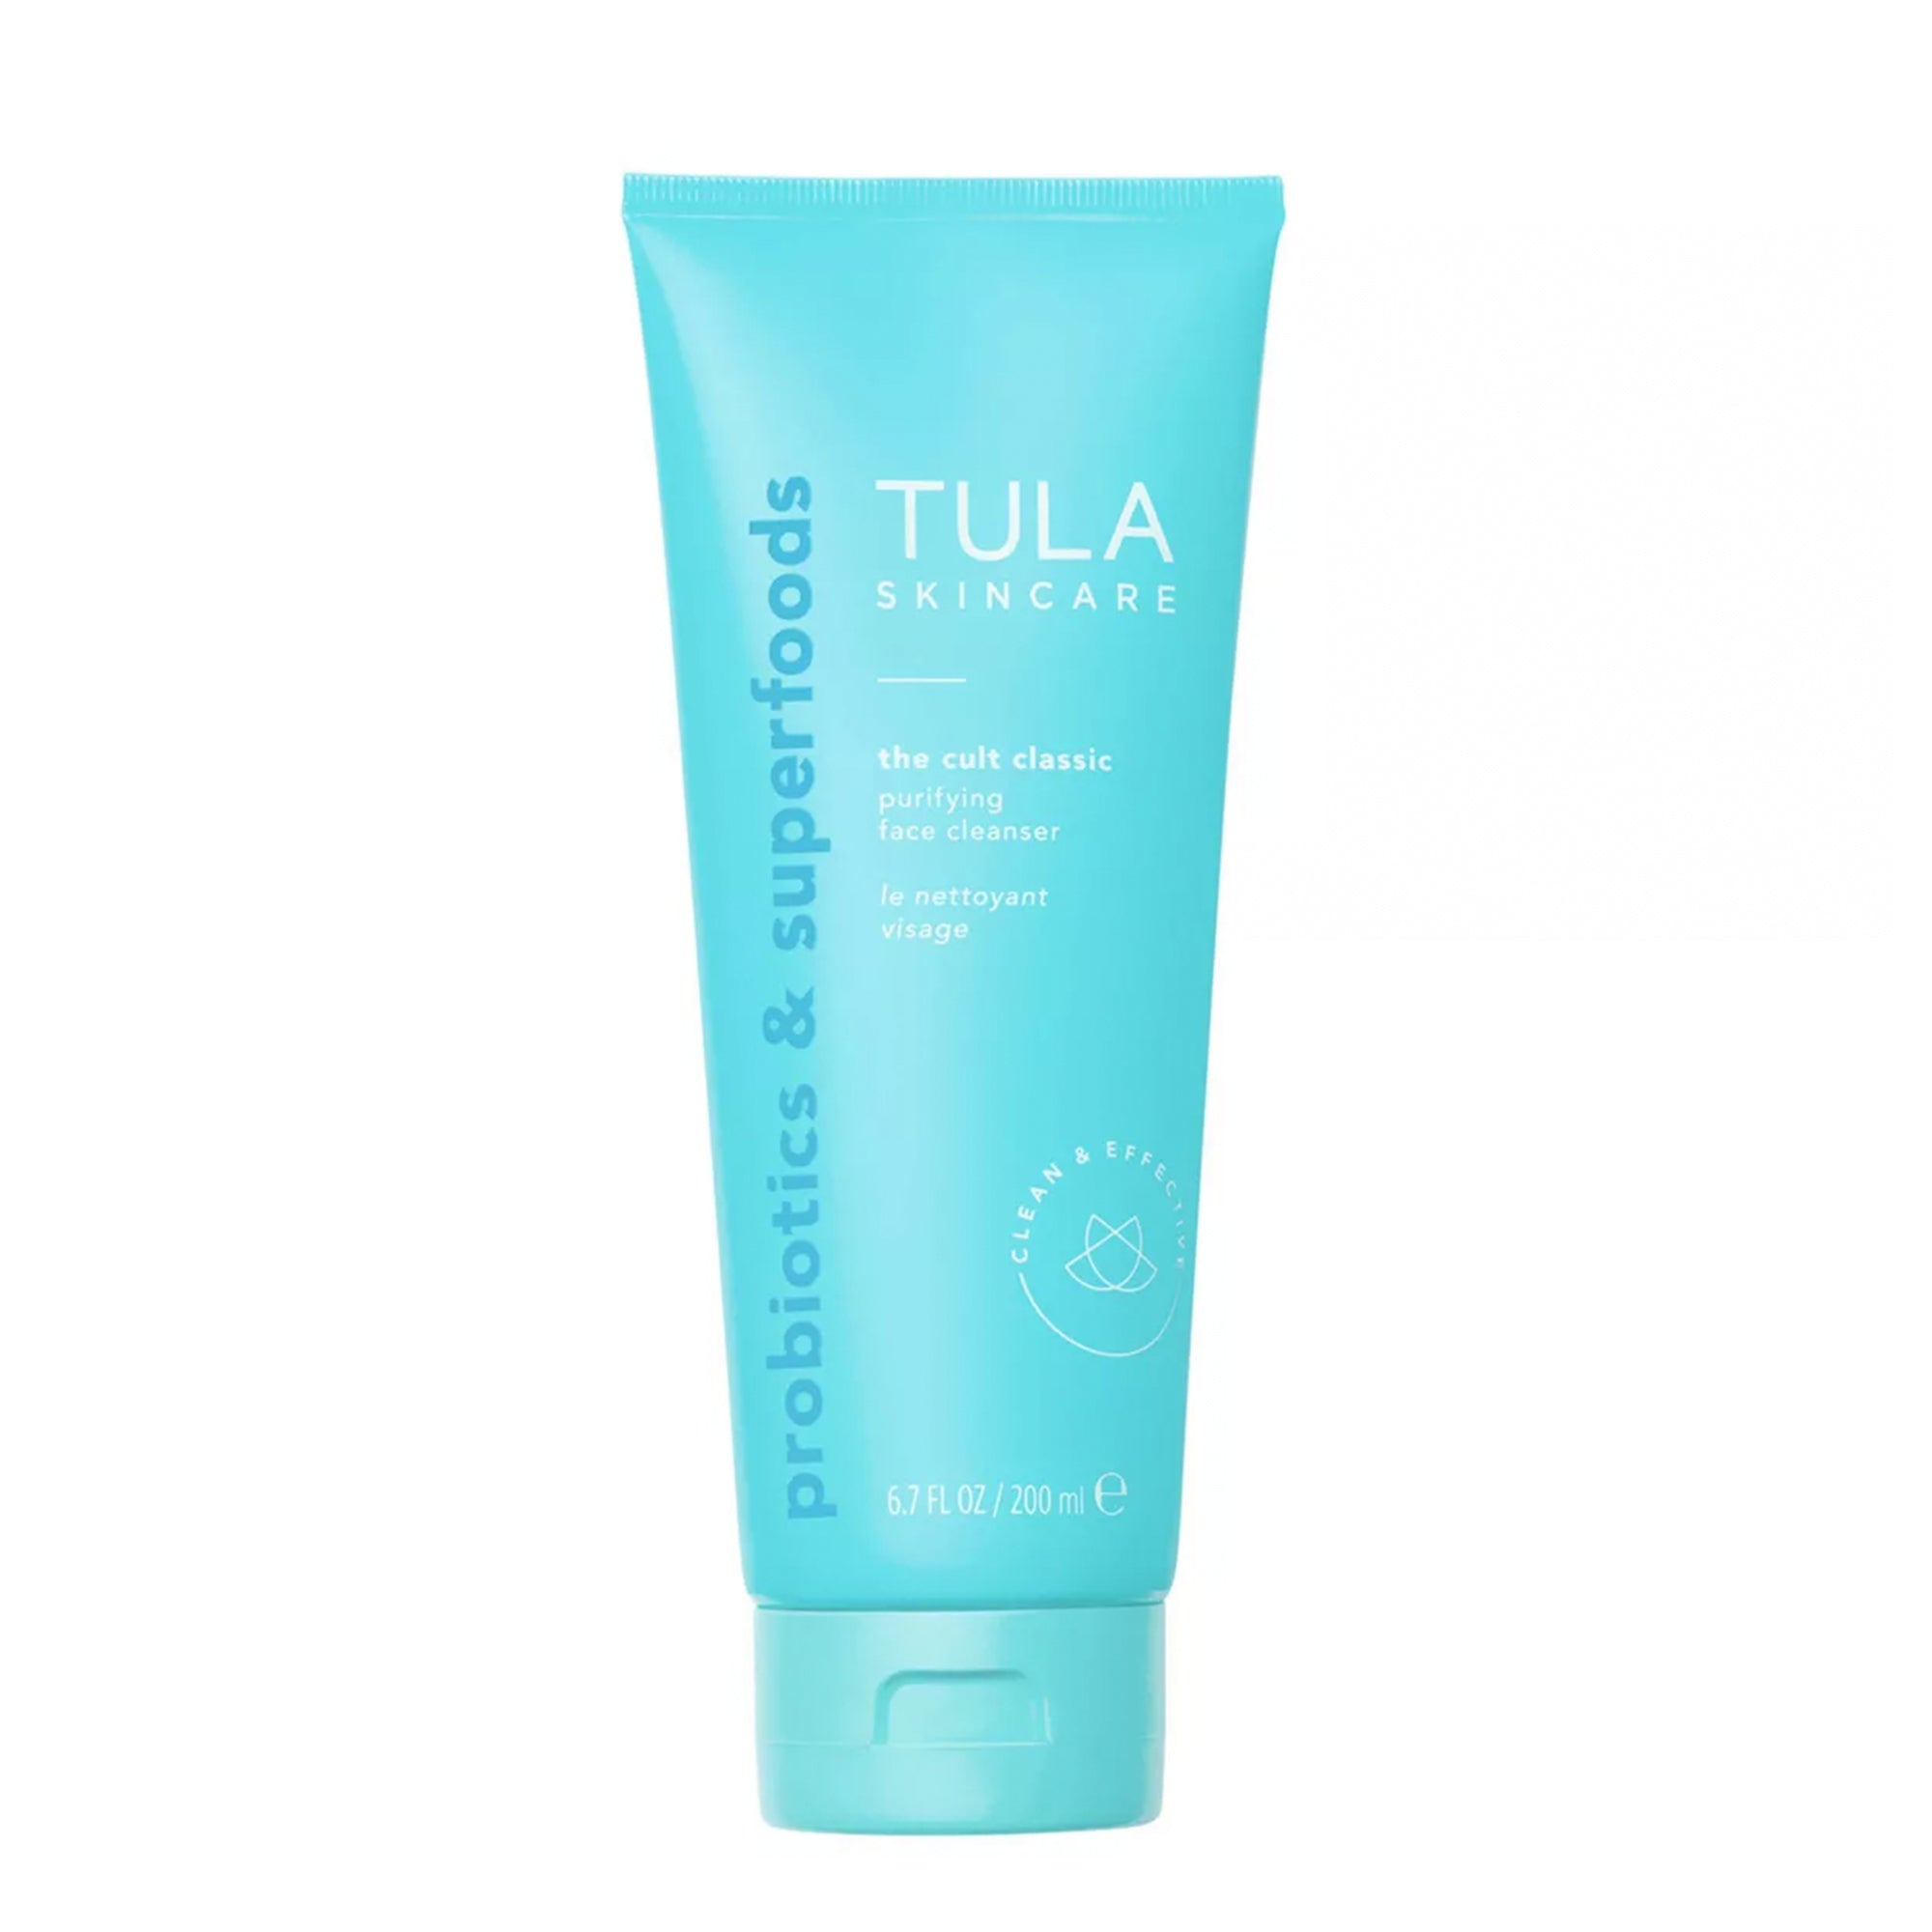 TULA SKINCARE The Cult Classic Purifying Face Cleanser 6.7 oz